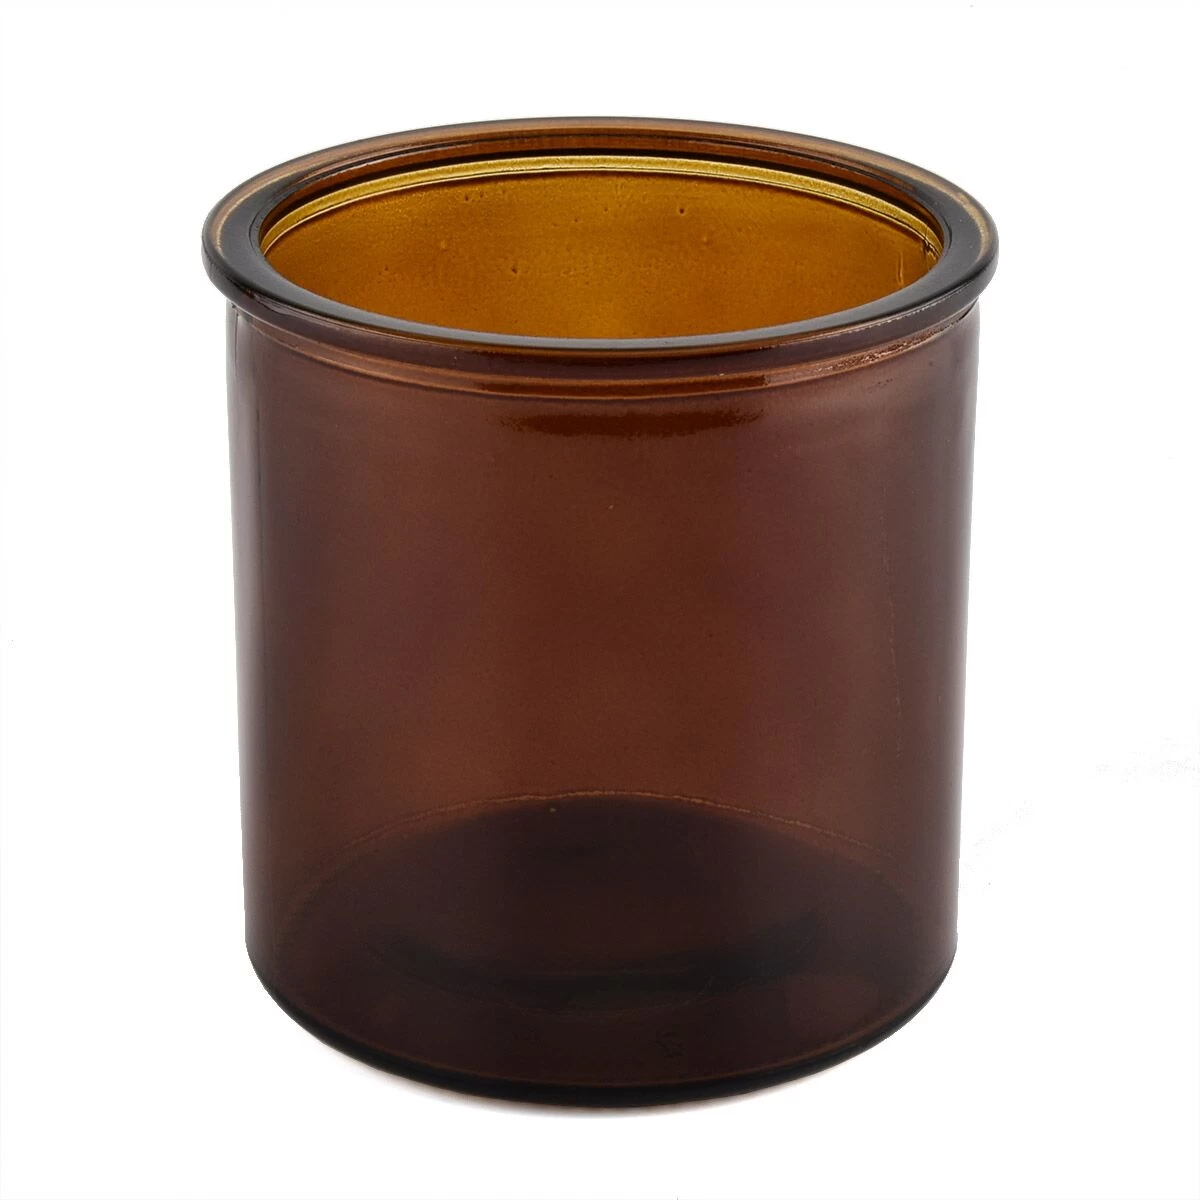 15oz amber glass candle jar with cork